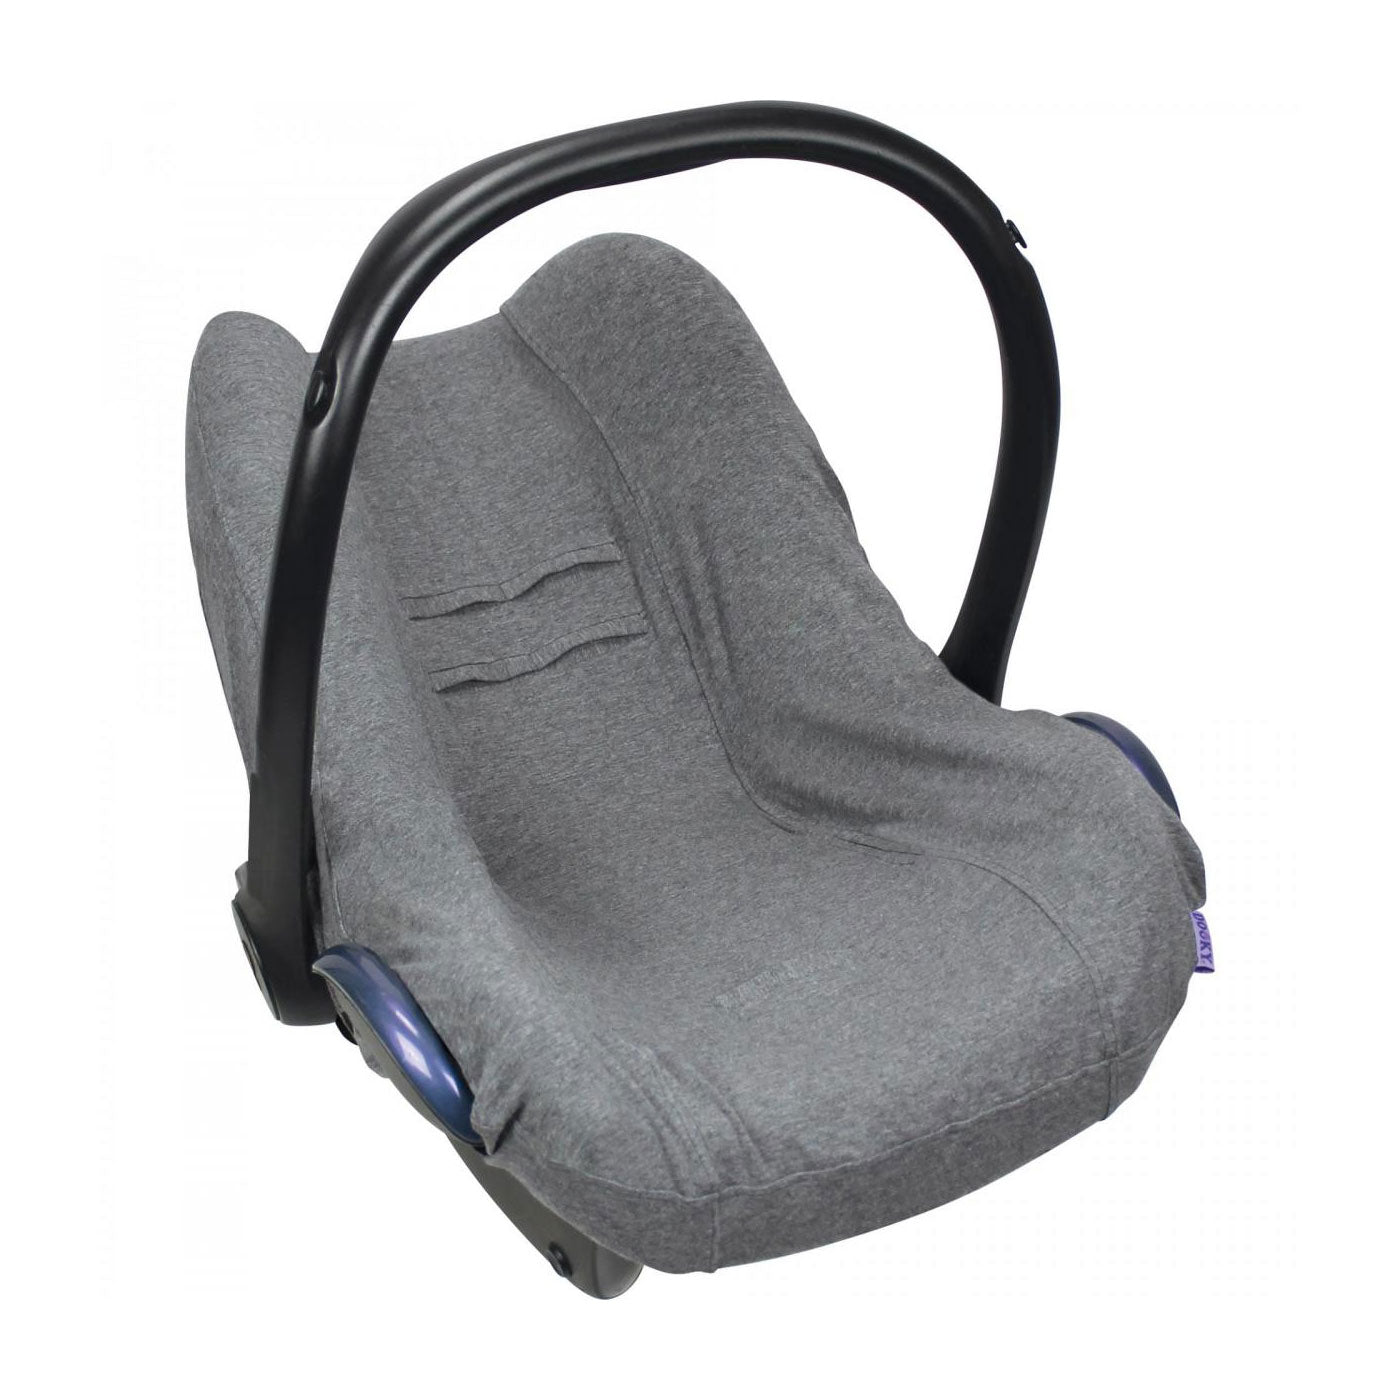 With the Dooky Car Seat Cover you can make your baby's car seat look extra fashionable and fresh in seconds. The Seat Cover gives a soft and comfortable ride for your baby and helps keep them cool whilst protecting the seat itself.  Update an older car seat to give a fresh new look. They can be easily removed and washed so any spills or dirt can be cleaned up quickly.